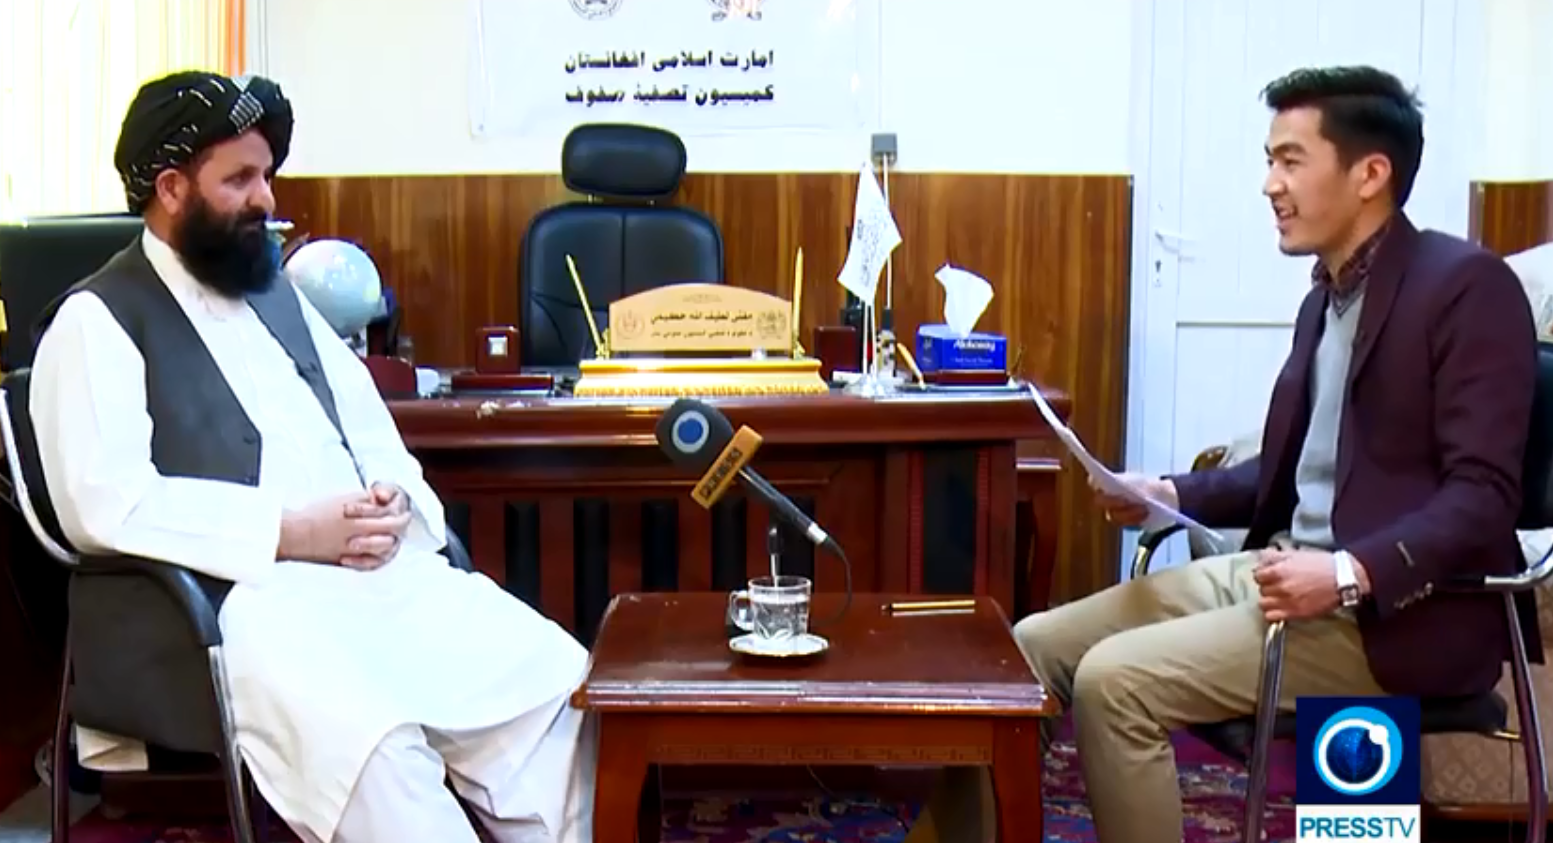 Top Taliban official to Press TV: No guarantee US won’t repeat its mistakes in Afgahnistan